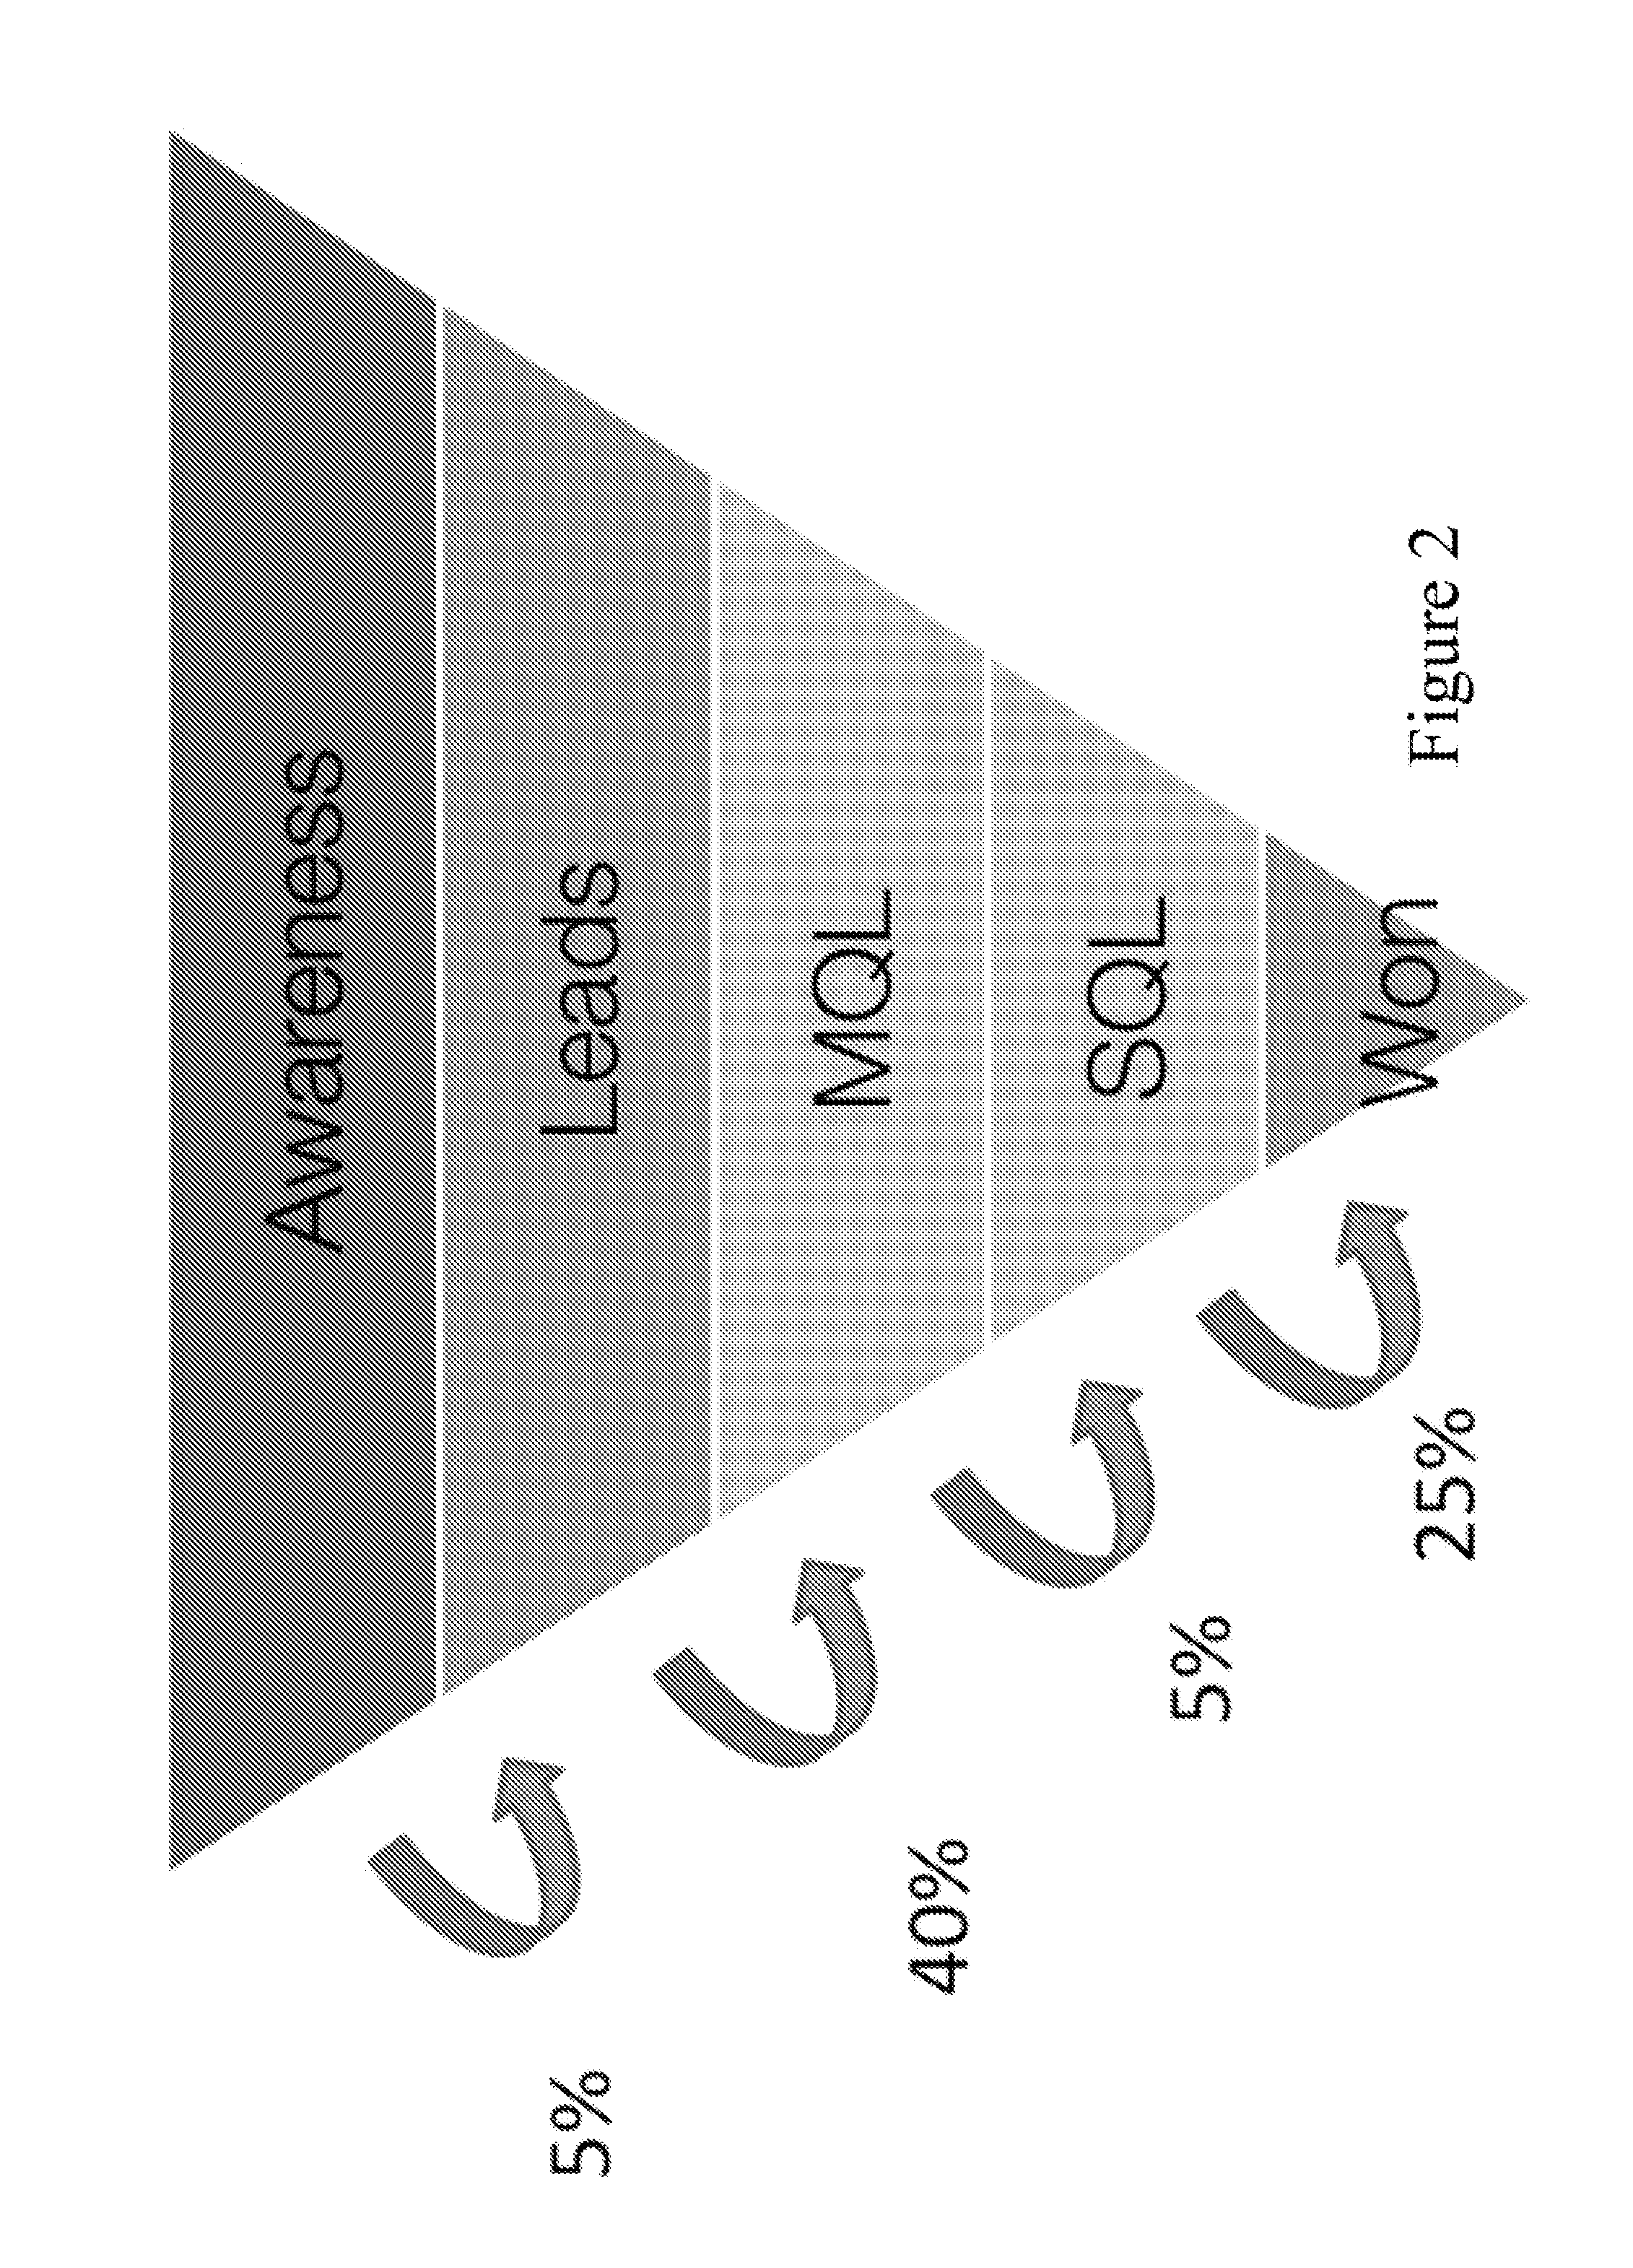 System and method for using marketing automation activity data for lead prioritization and marketing campaign optimization